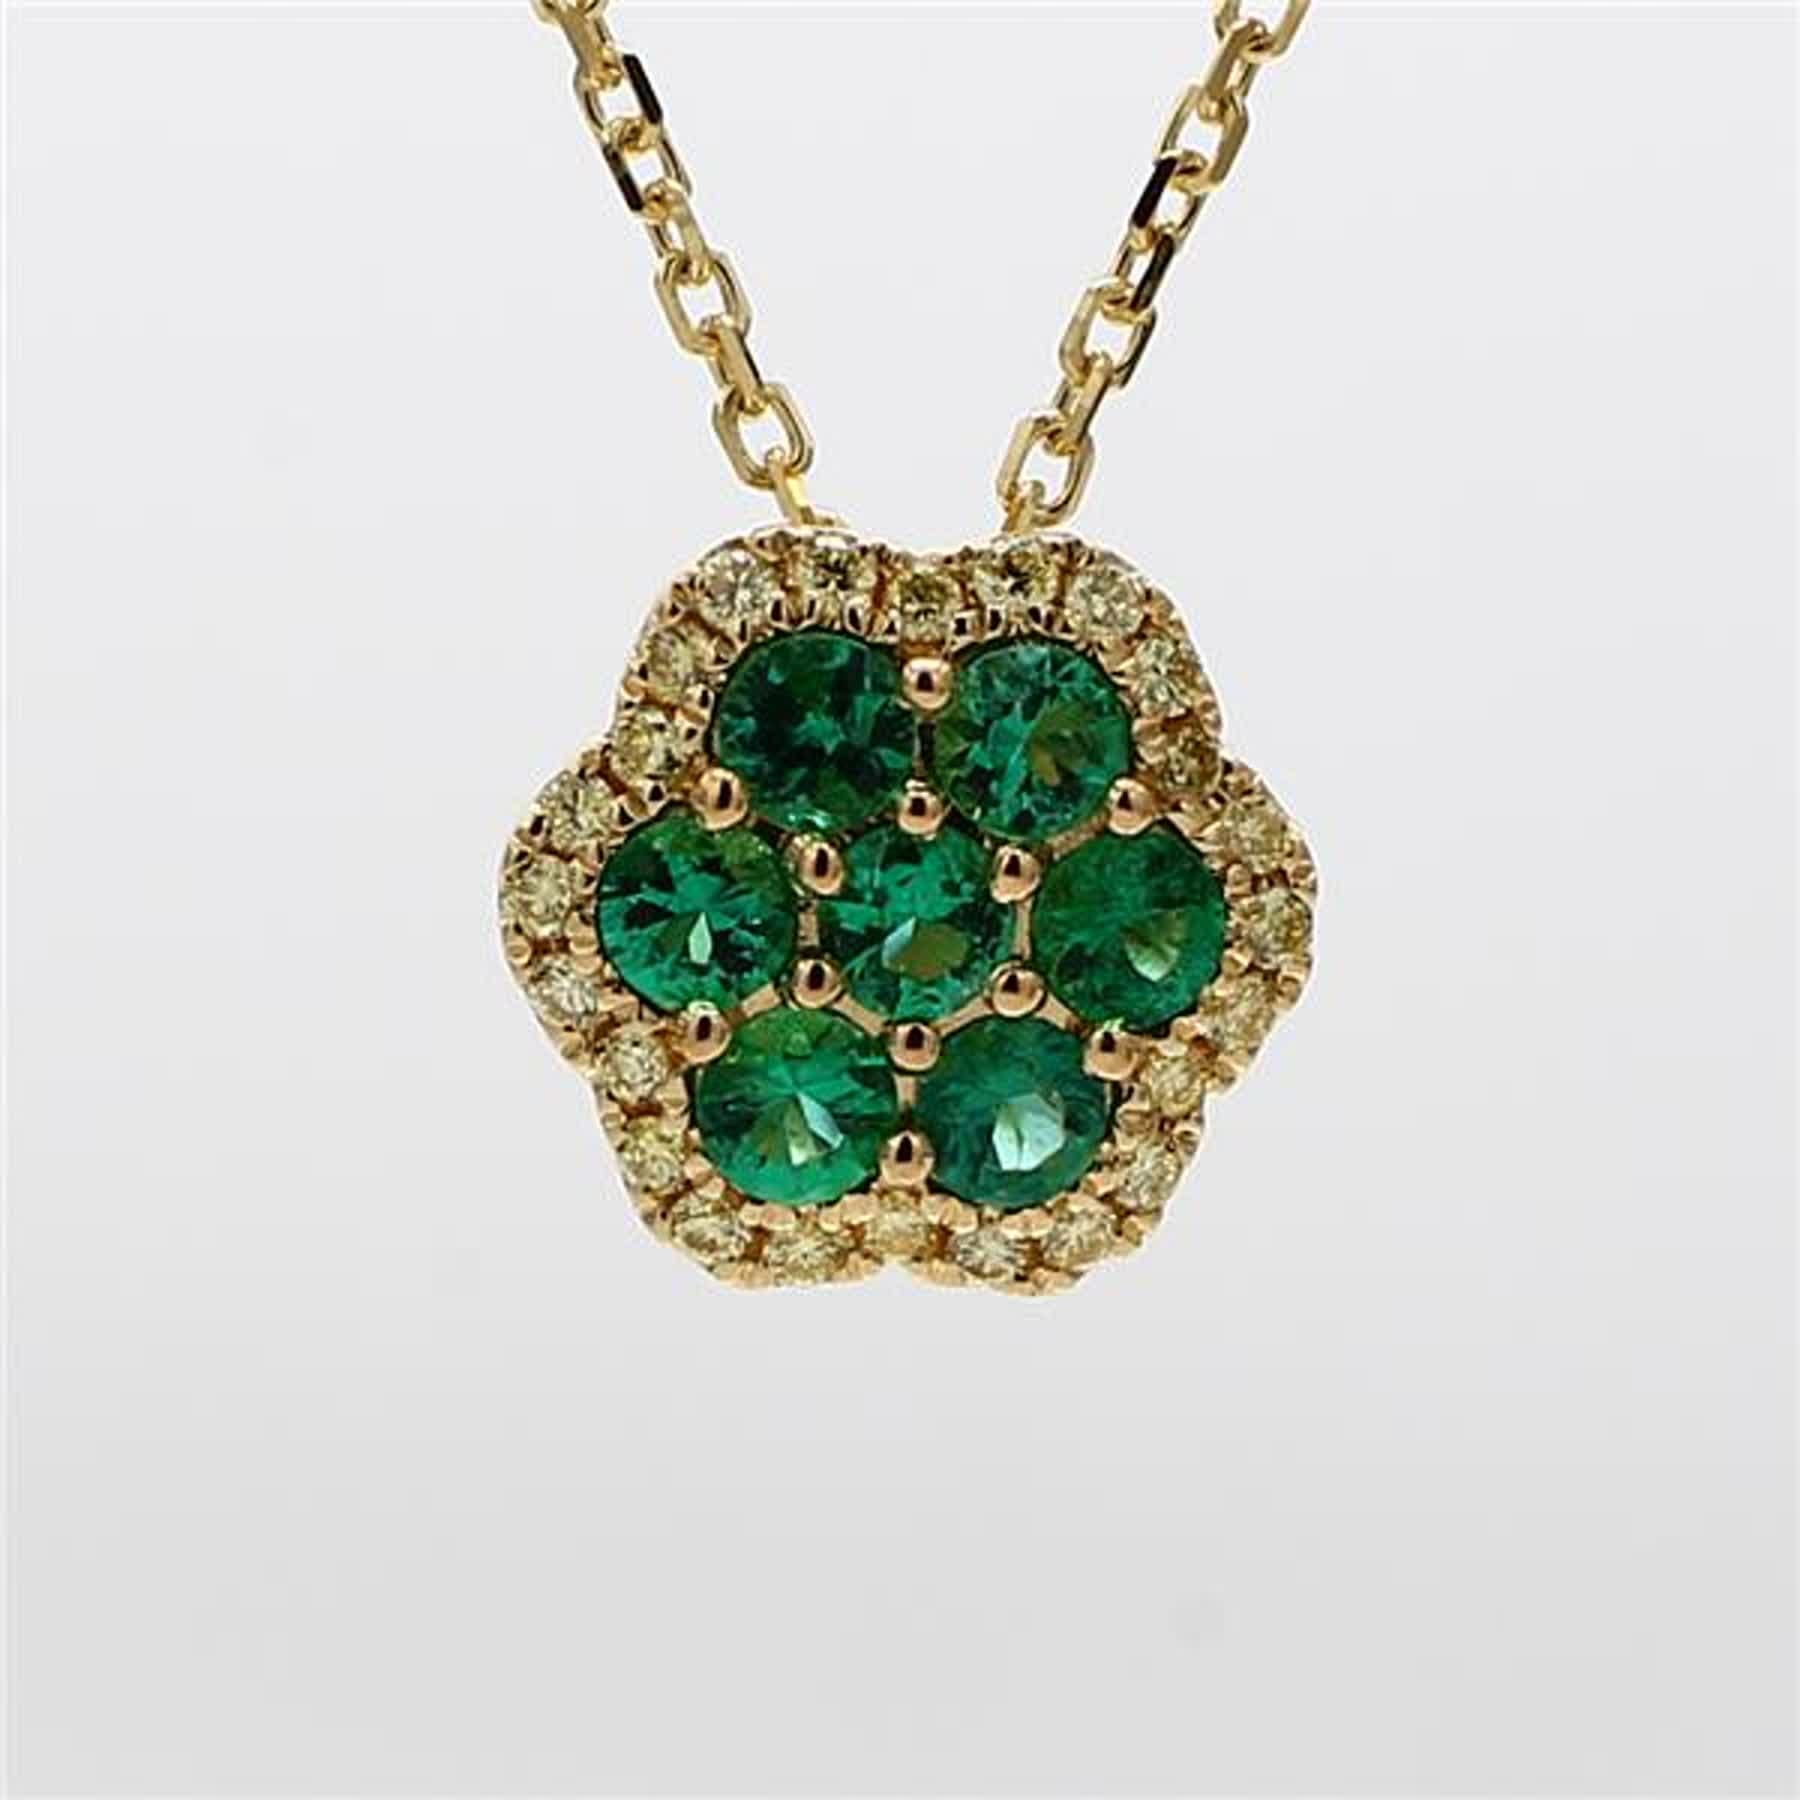 RareGemWorld's classic emerald pendant. Mounted in a beautiful 18K Yellow Gold setting with natural round cut emerald's. The emerald's are surrounded by natural round yellow diamond melee. This pendant is guaranteed to impress and enhance your